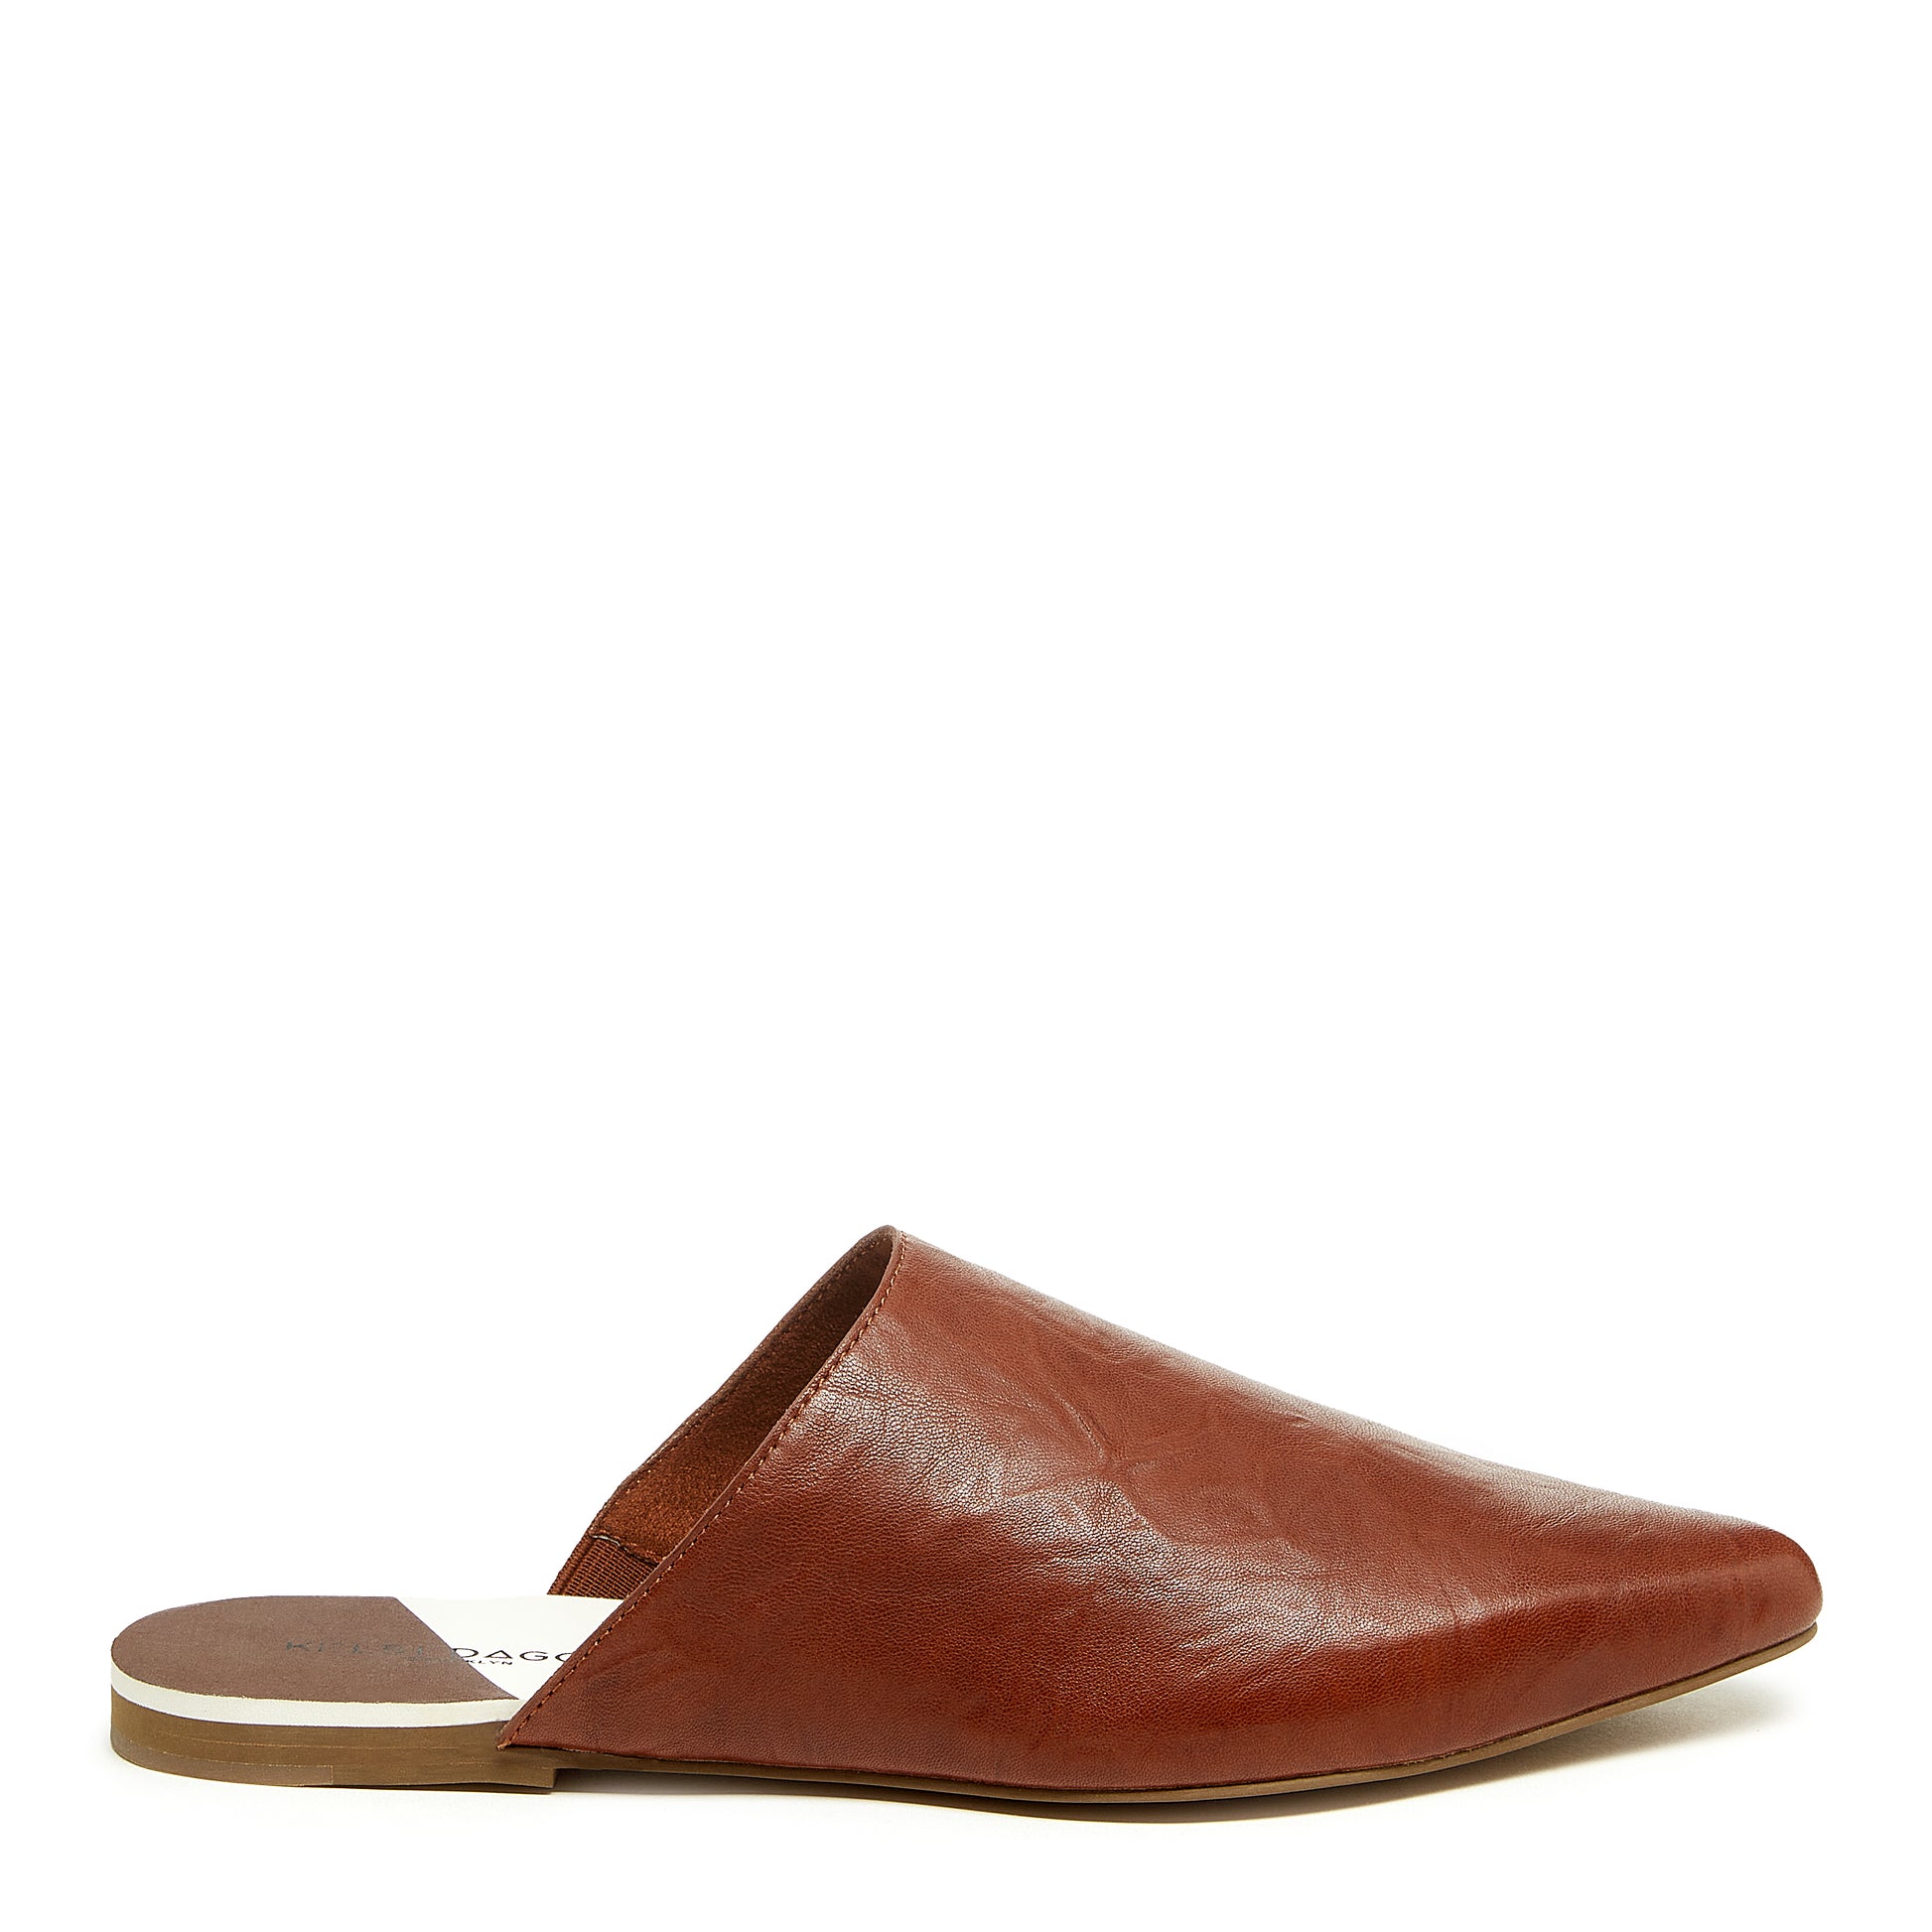 Kelsi Dagger Cider Leather Mules - Pointed Perfection